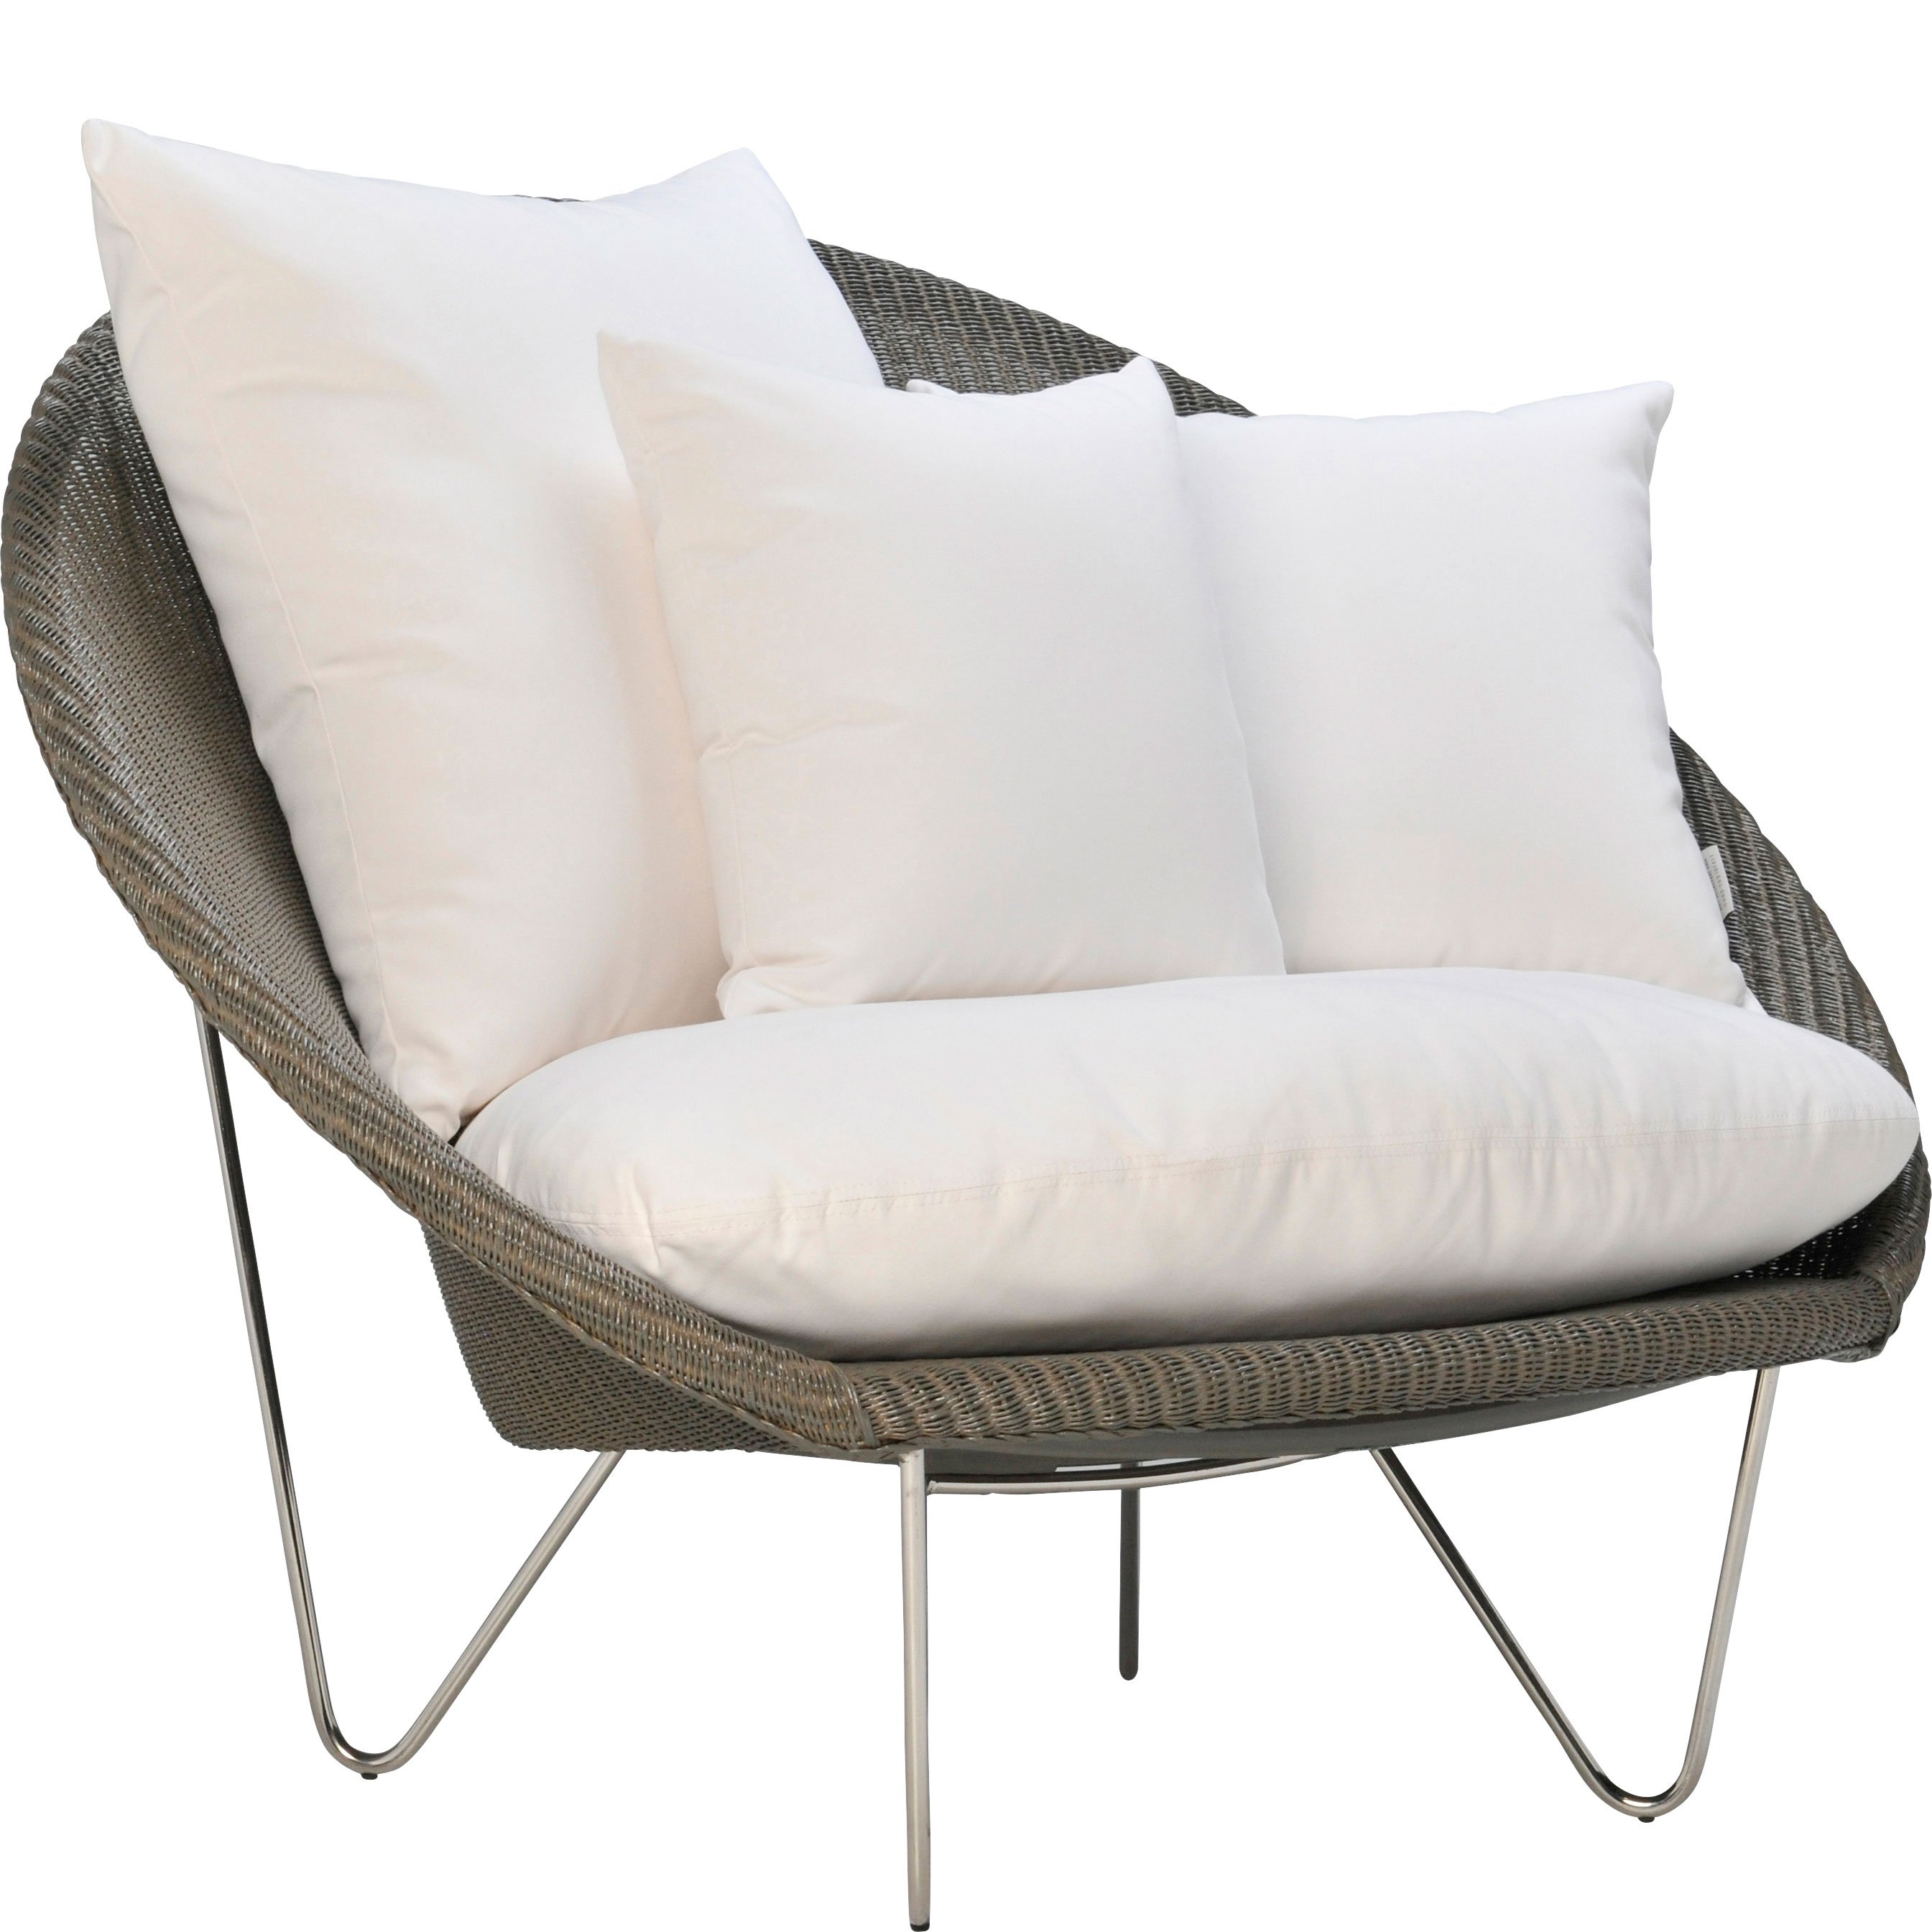 Haworth Gigi II lounge chair in grey color with white seating and cushions